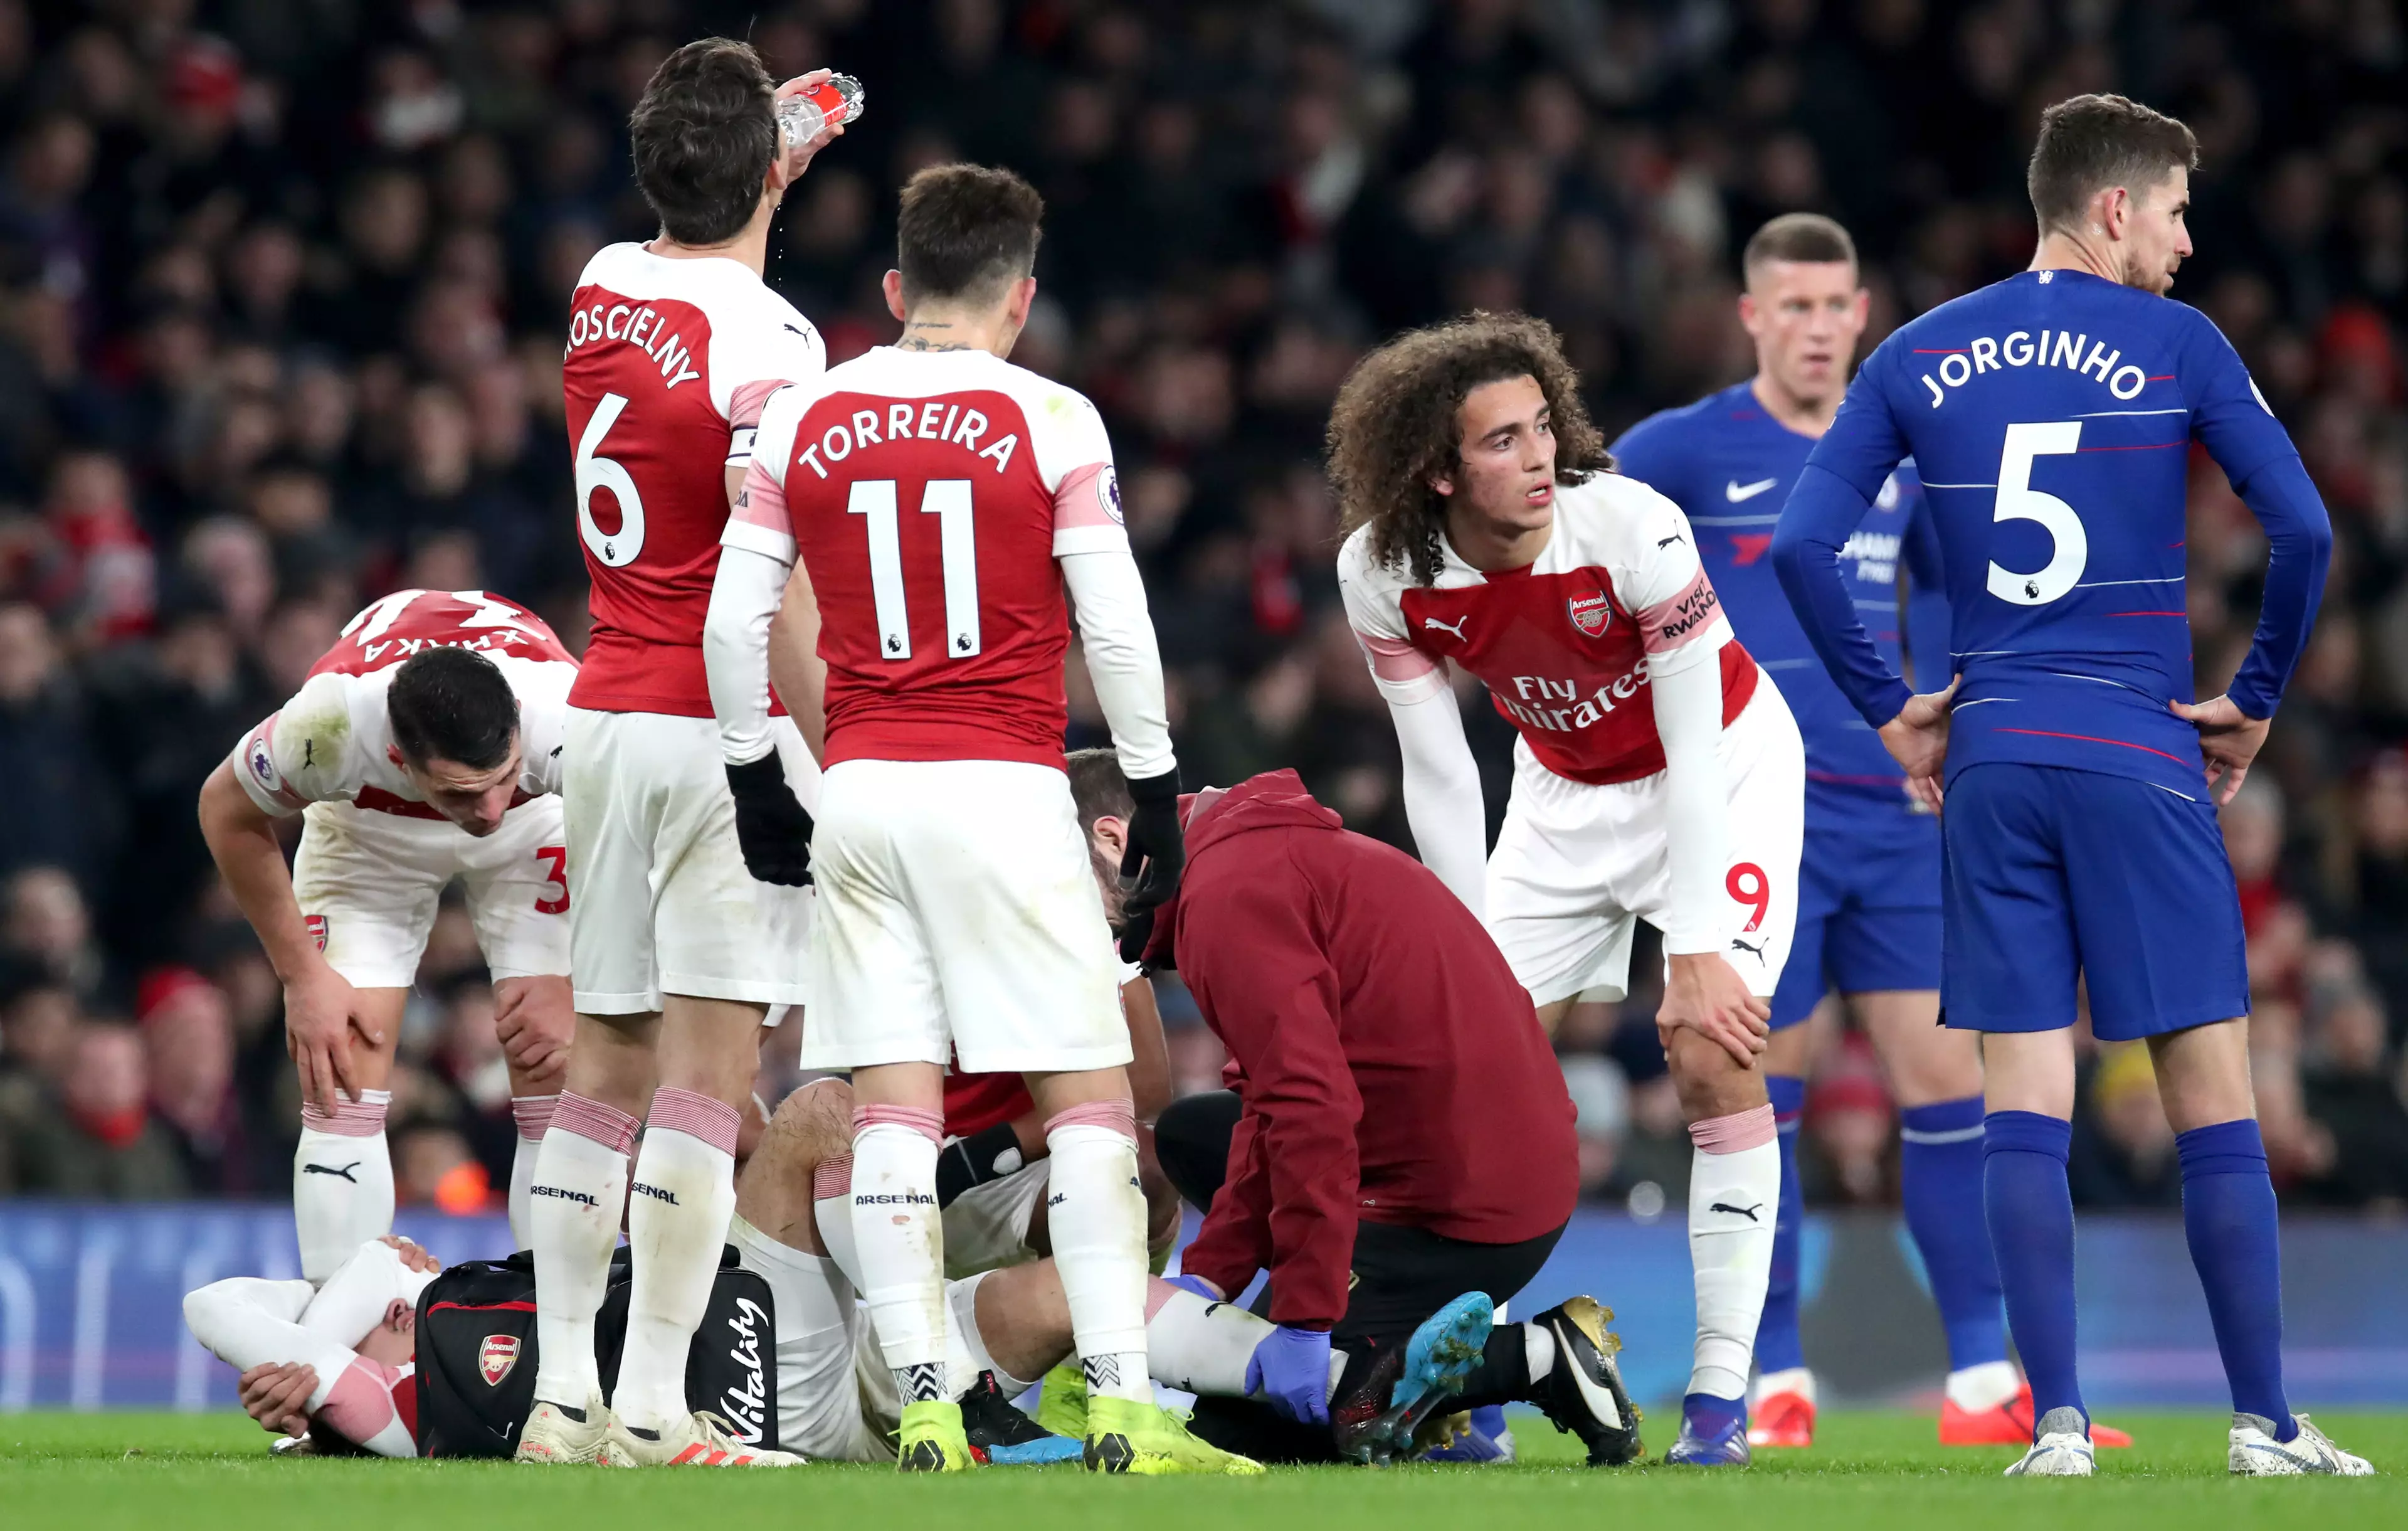 Players immediately looked worried when Bellerin did his injury. Image: PA Images